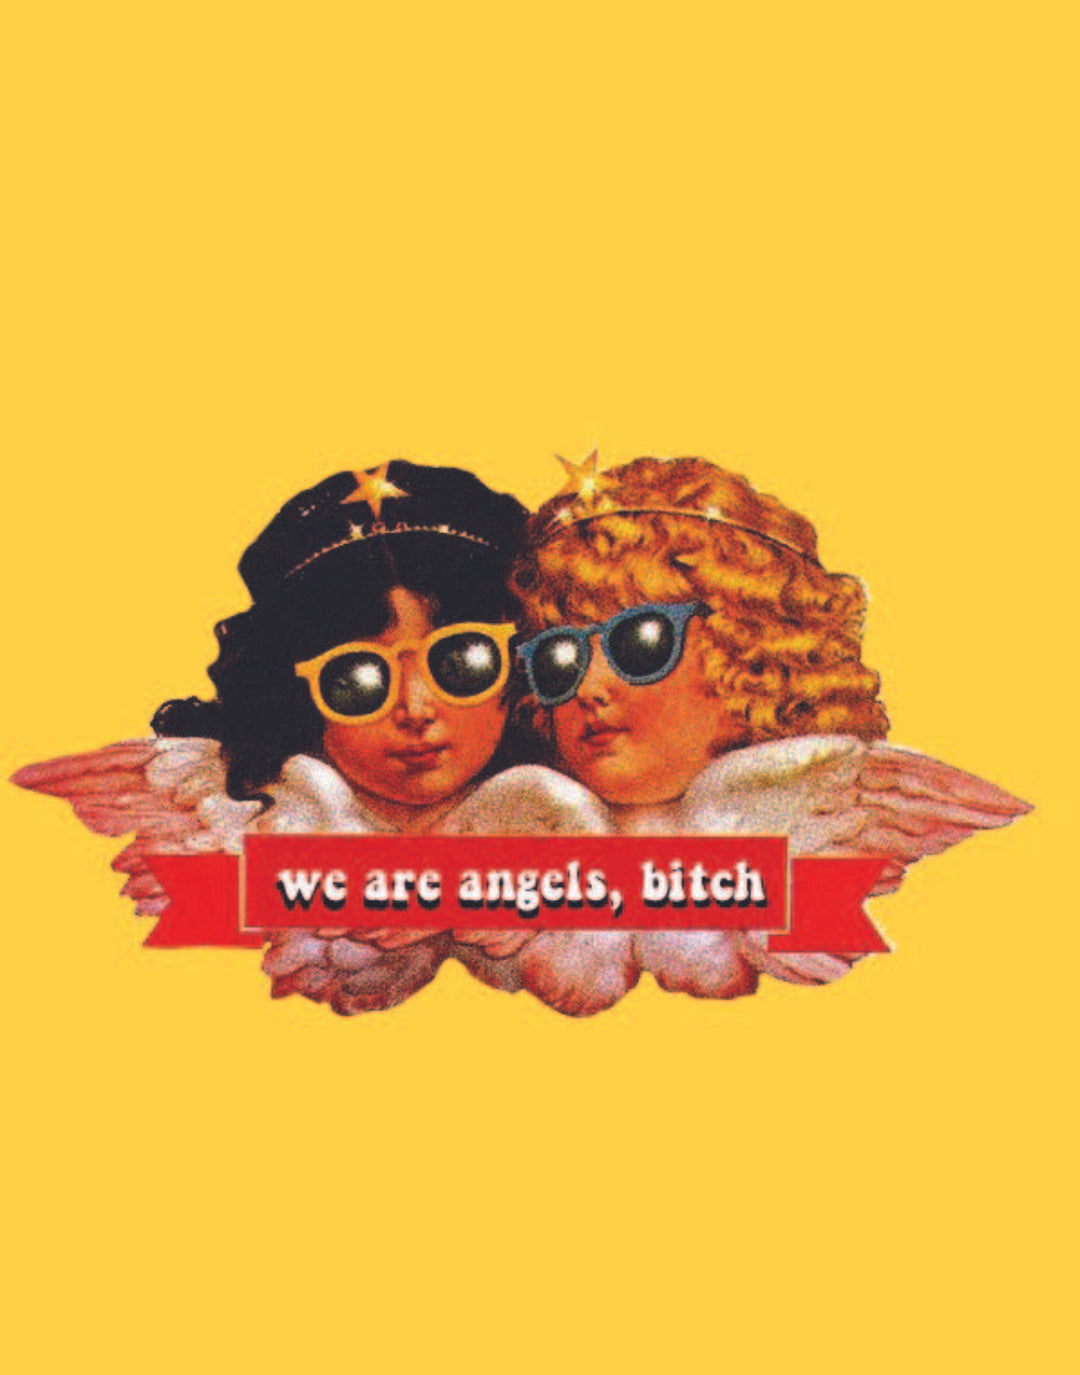 ANGELS BITCH POSTER IN MULTIPLE COLORS - PosterFi